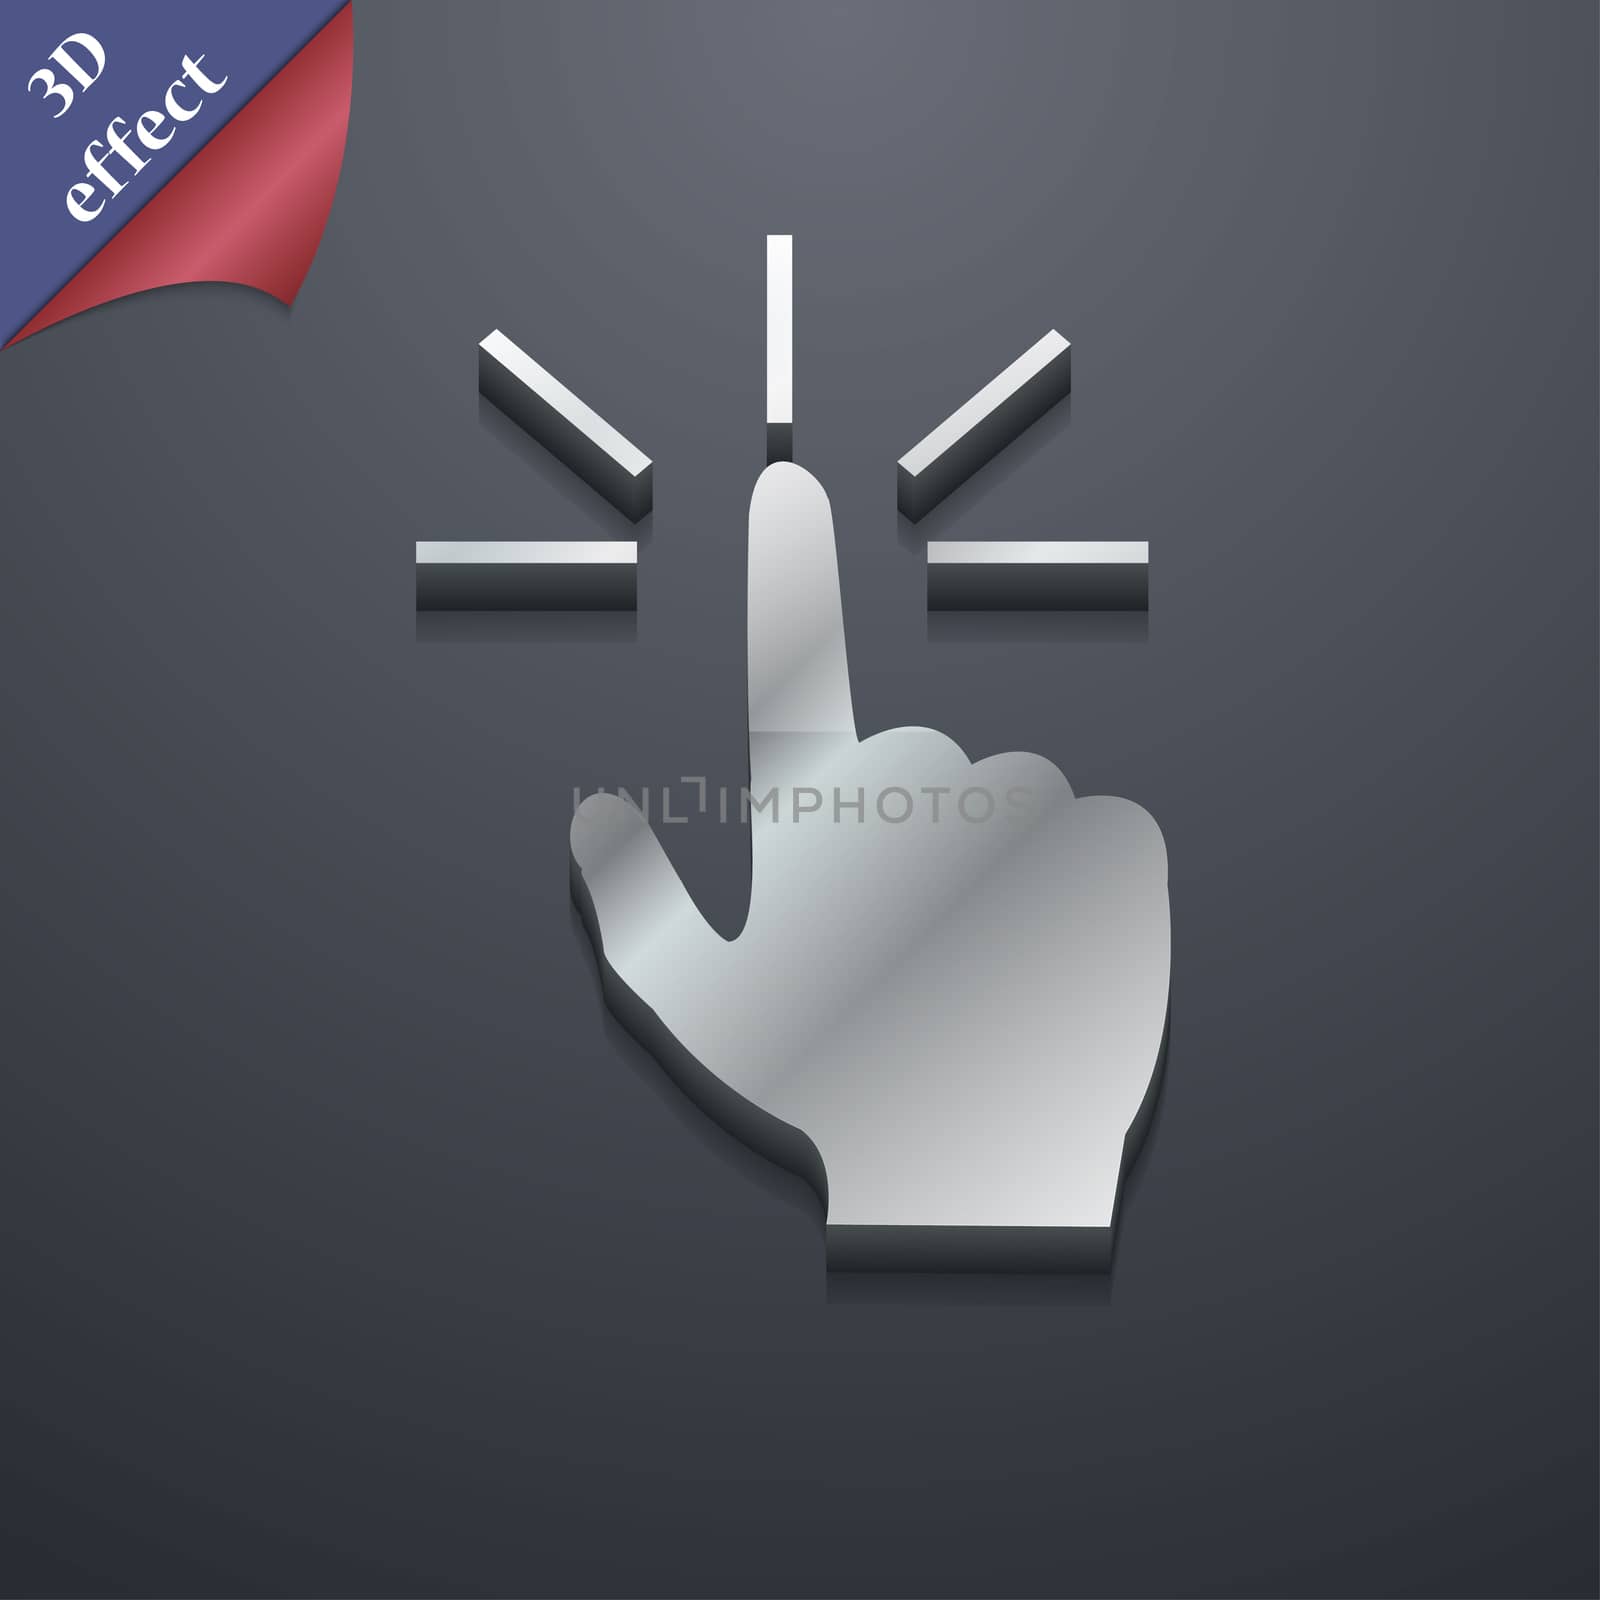 Click here hand icon symbol. 3D style. Trendy, modern design with space for your text illustration. Rastrized copy